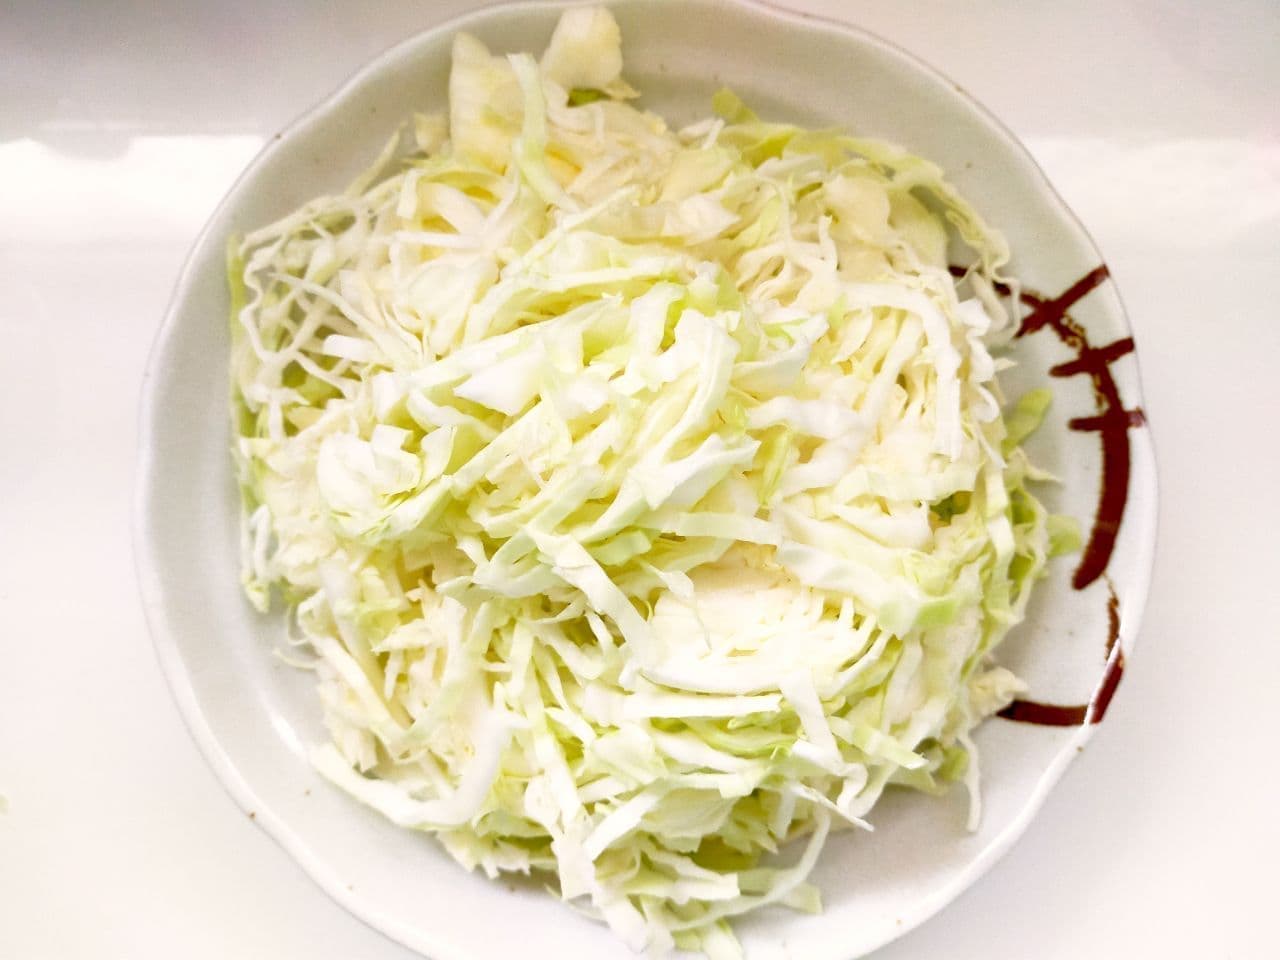 Easy "Pork Belly Cabbage" Recipe in the Microwave